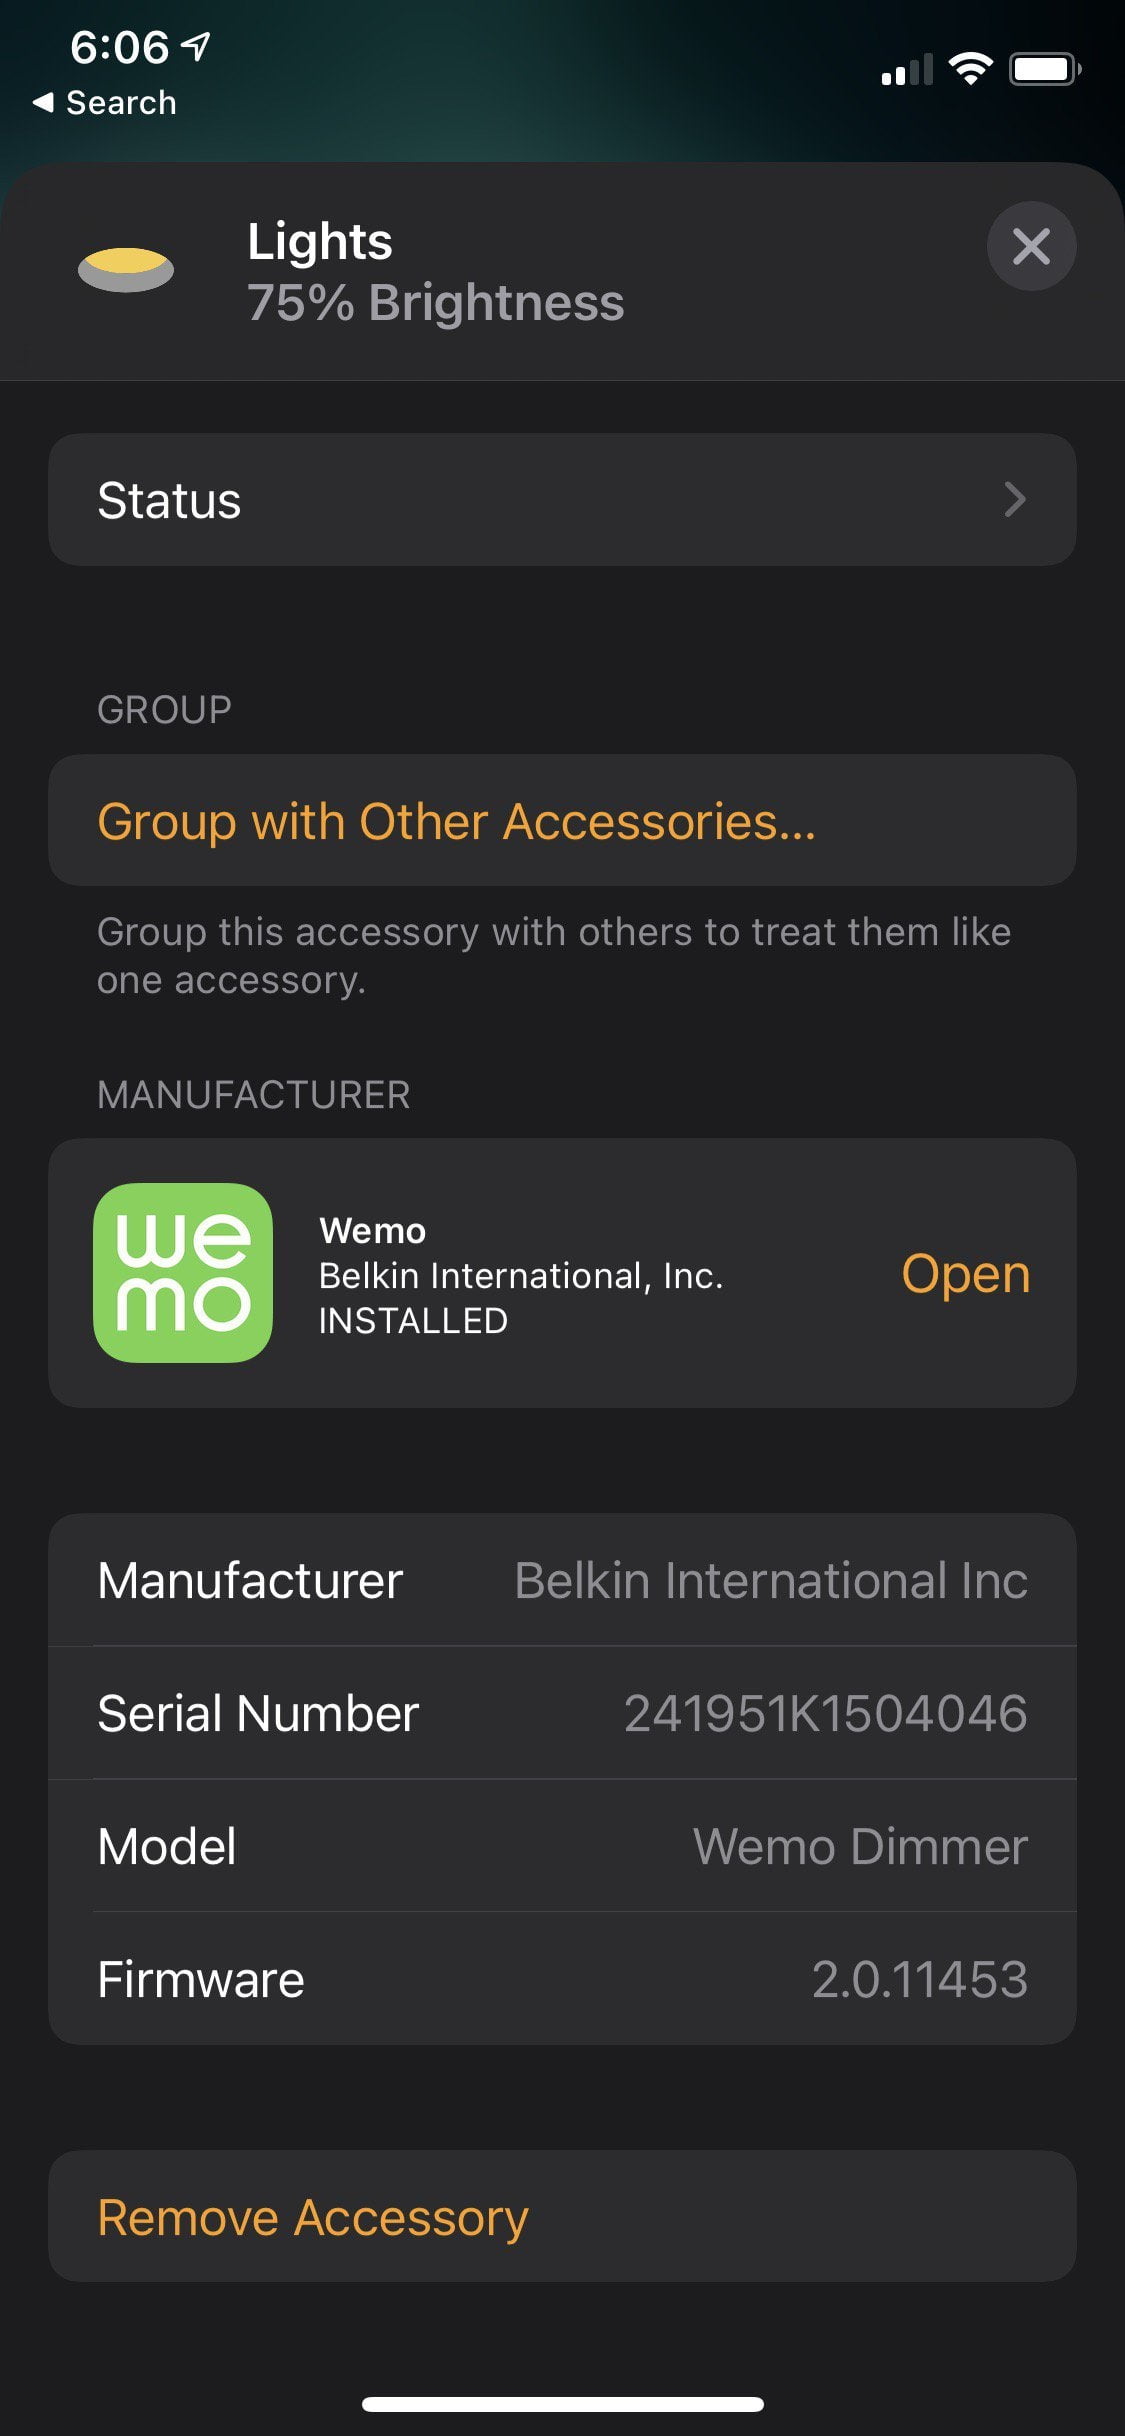 Wemo dimmers can be added to the homekit